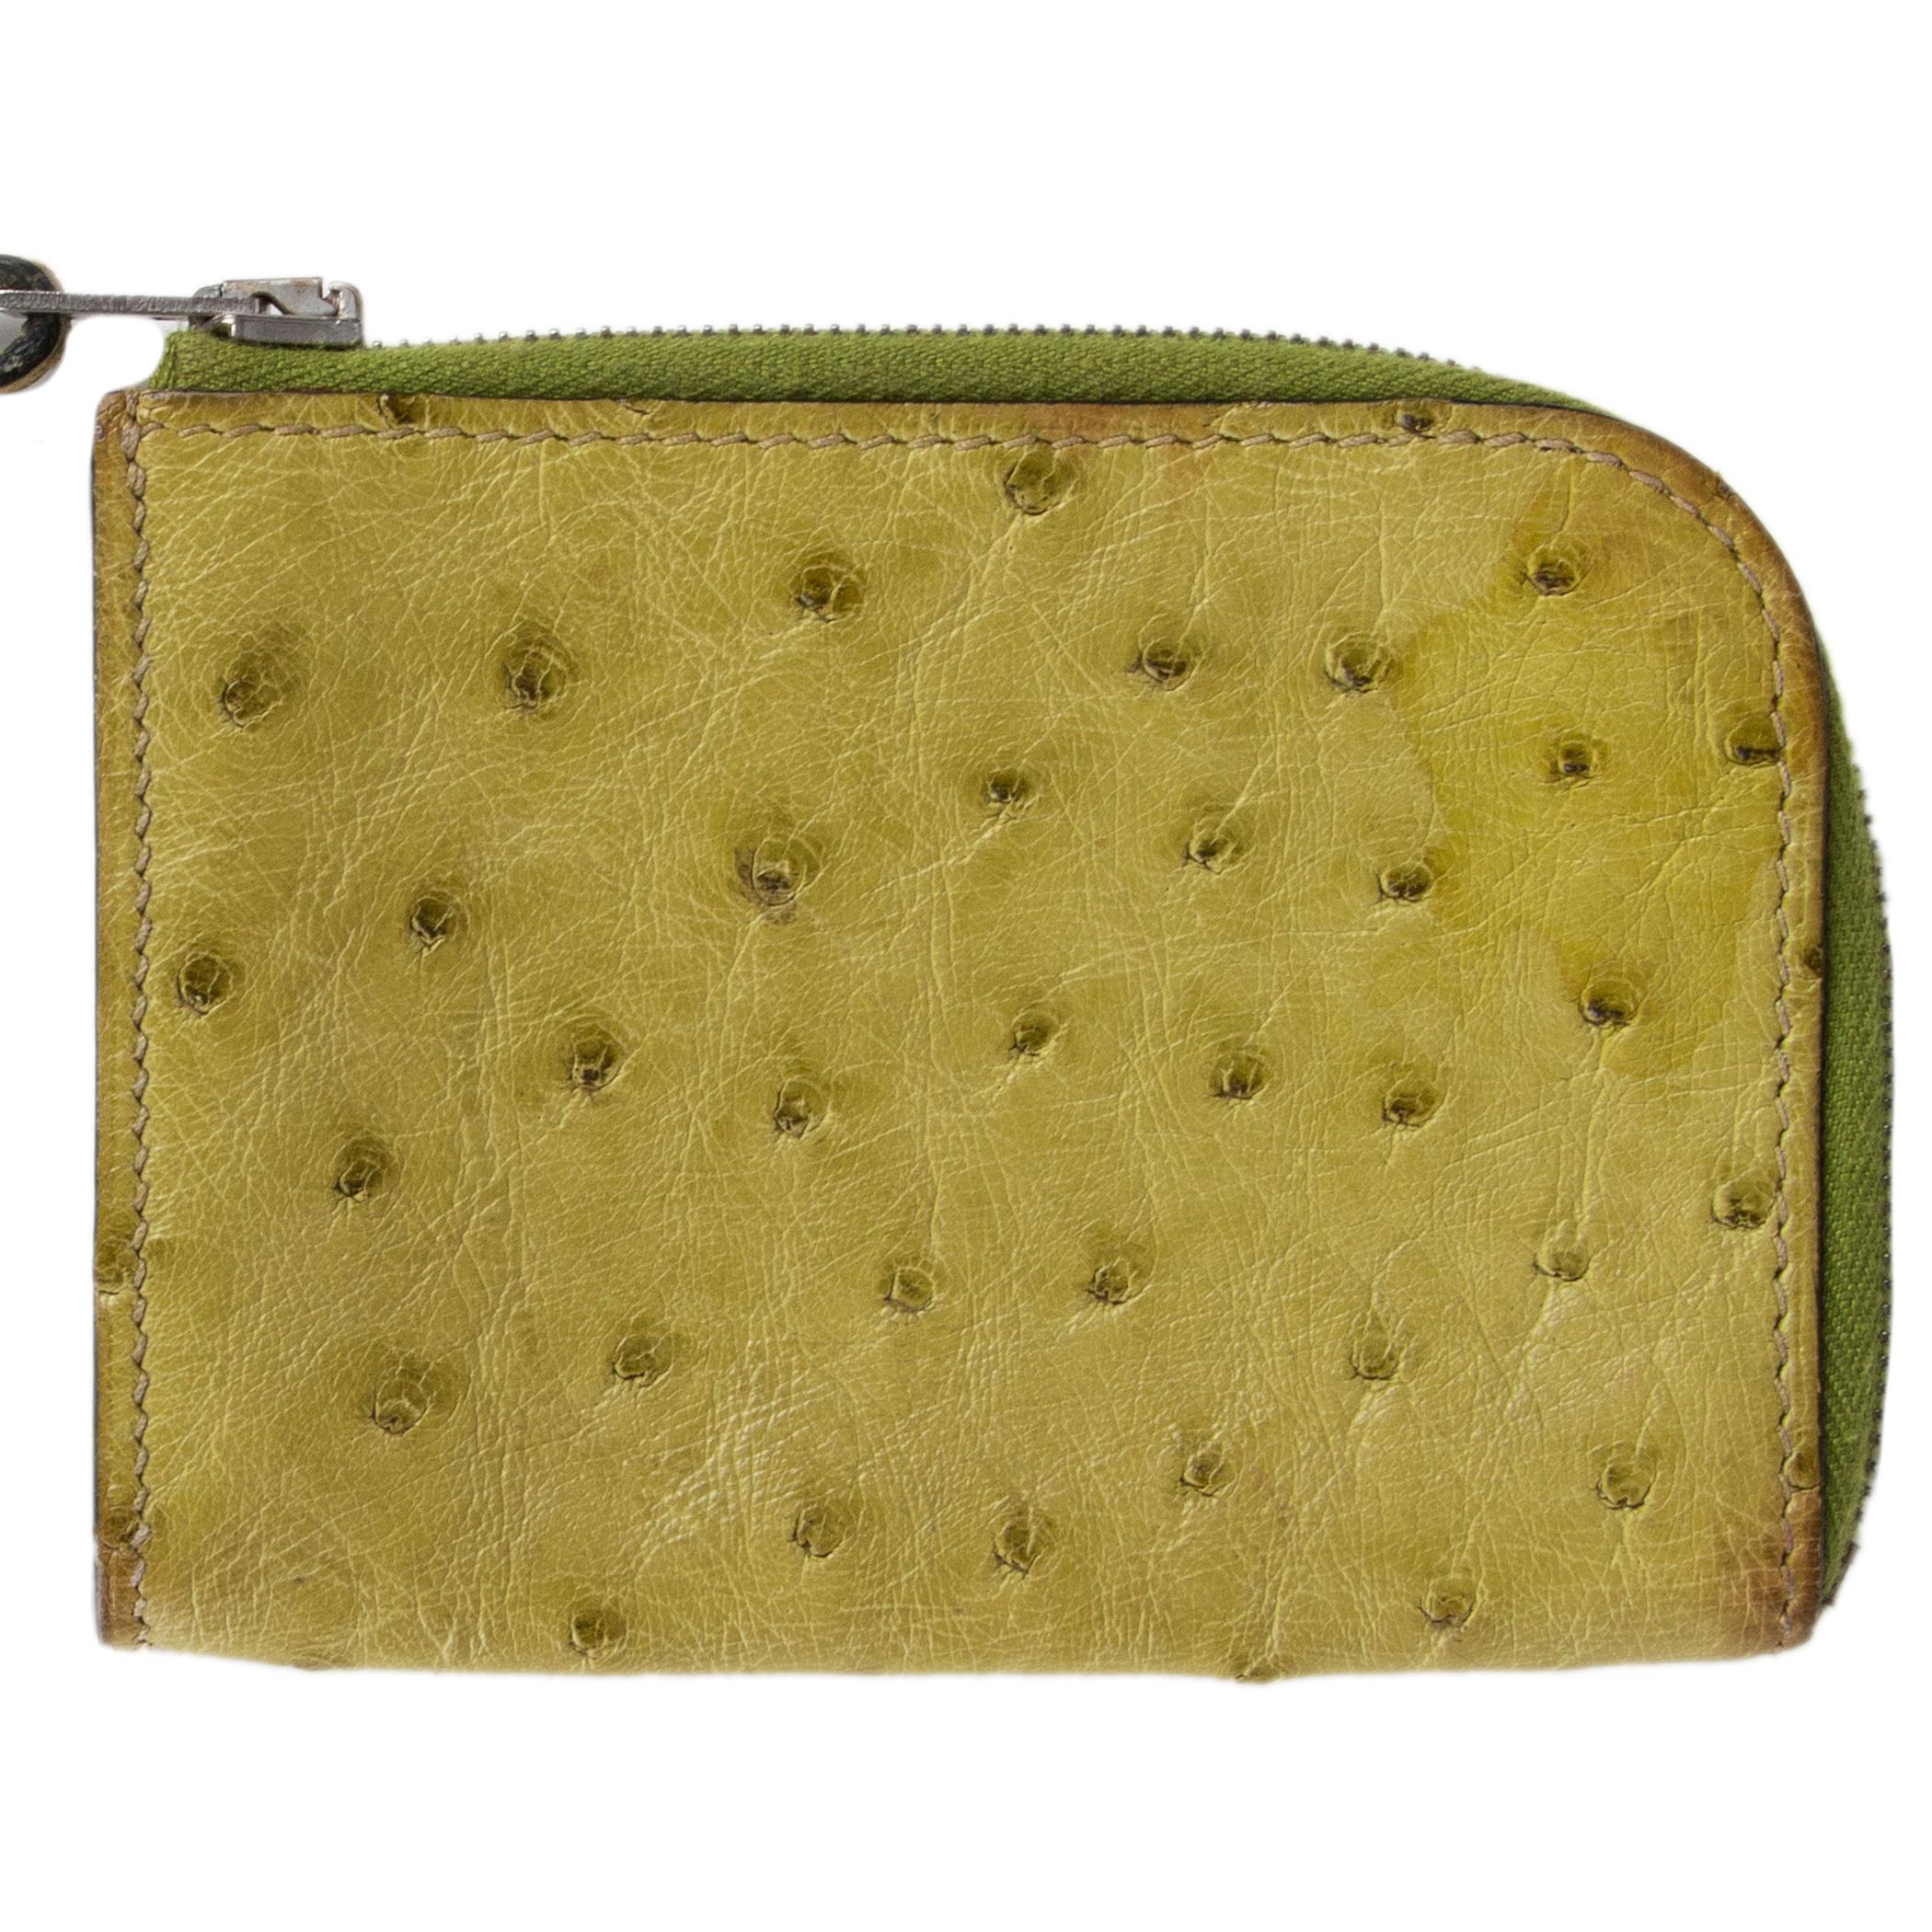 Hermes zip wallet with strap in Vert Anis (chartreuse) ostrich leather. Closes with a zipper. Lined in Chevre (goat skin). Has been carried and shows some overall darkening. Overall impression is very good.

Width 10cm (3.9in)
Height 7.5cm